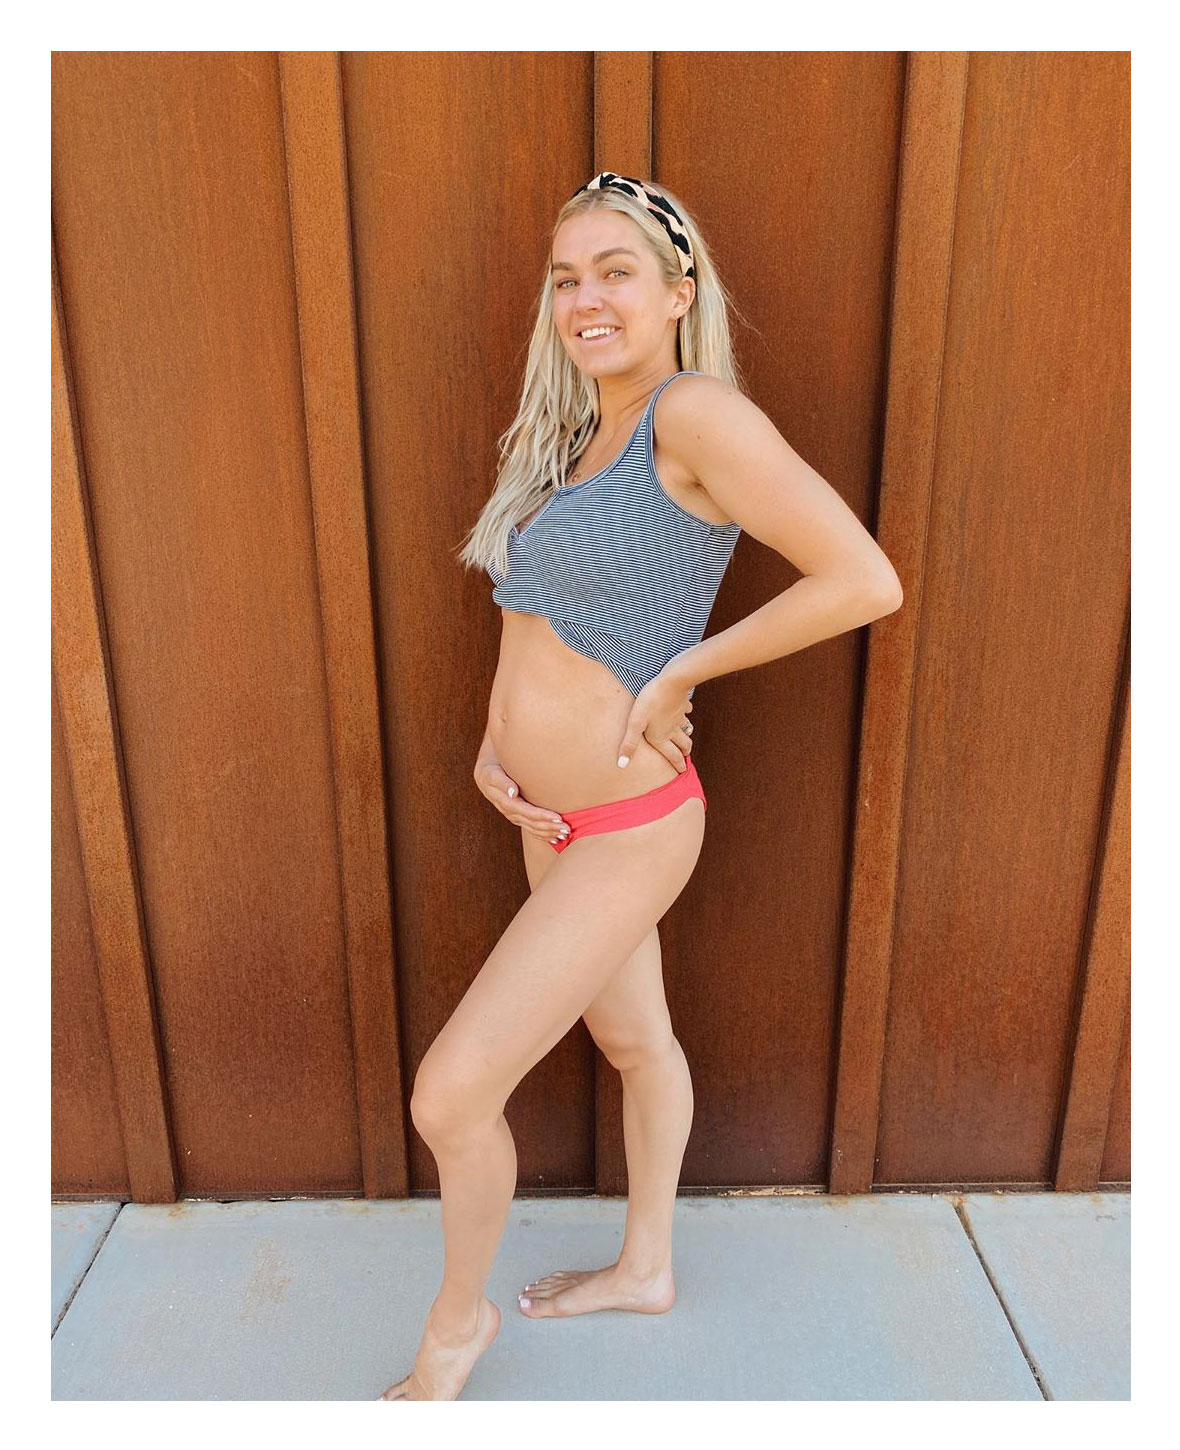 Pregnant Lindsay Arnold Wondered Why Baby Bump Wasn't 'Popping